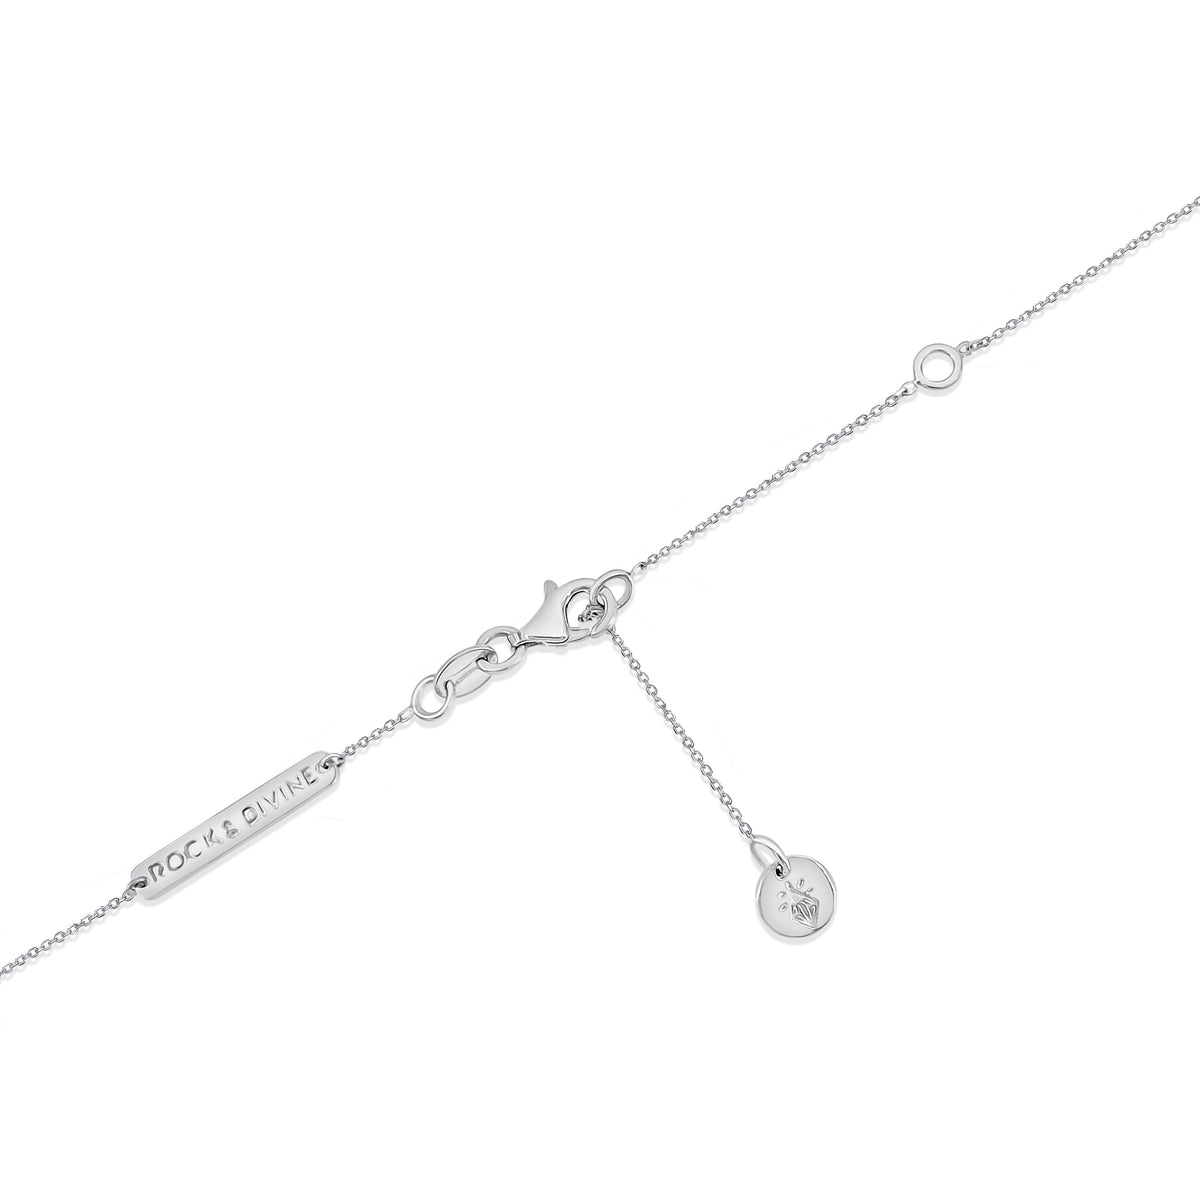 Rock & Divine Dawn Collection Daylight Diamond Necklace 18K White Gold 0.50 CTW